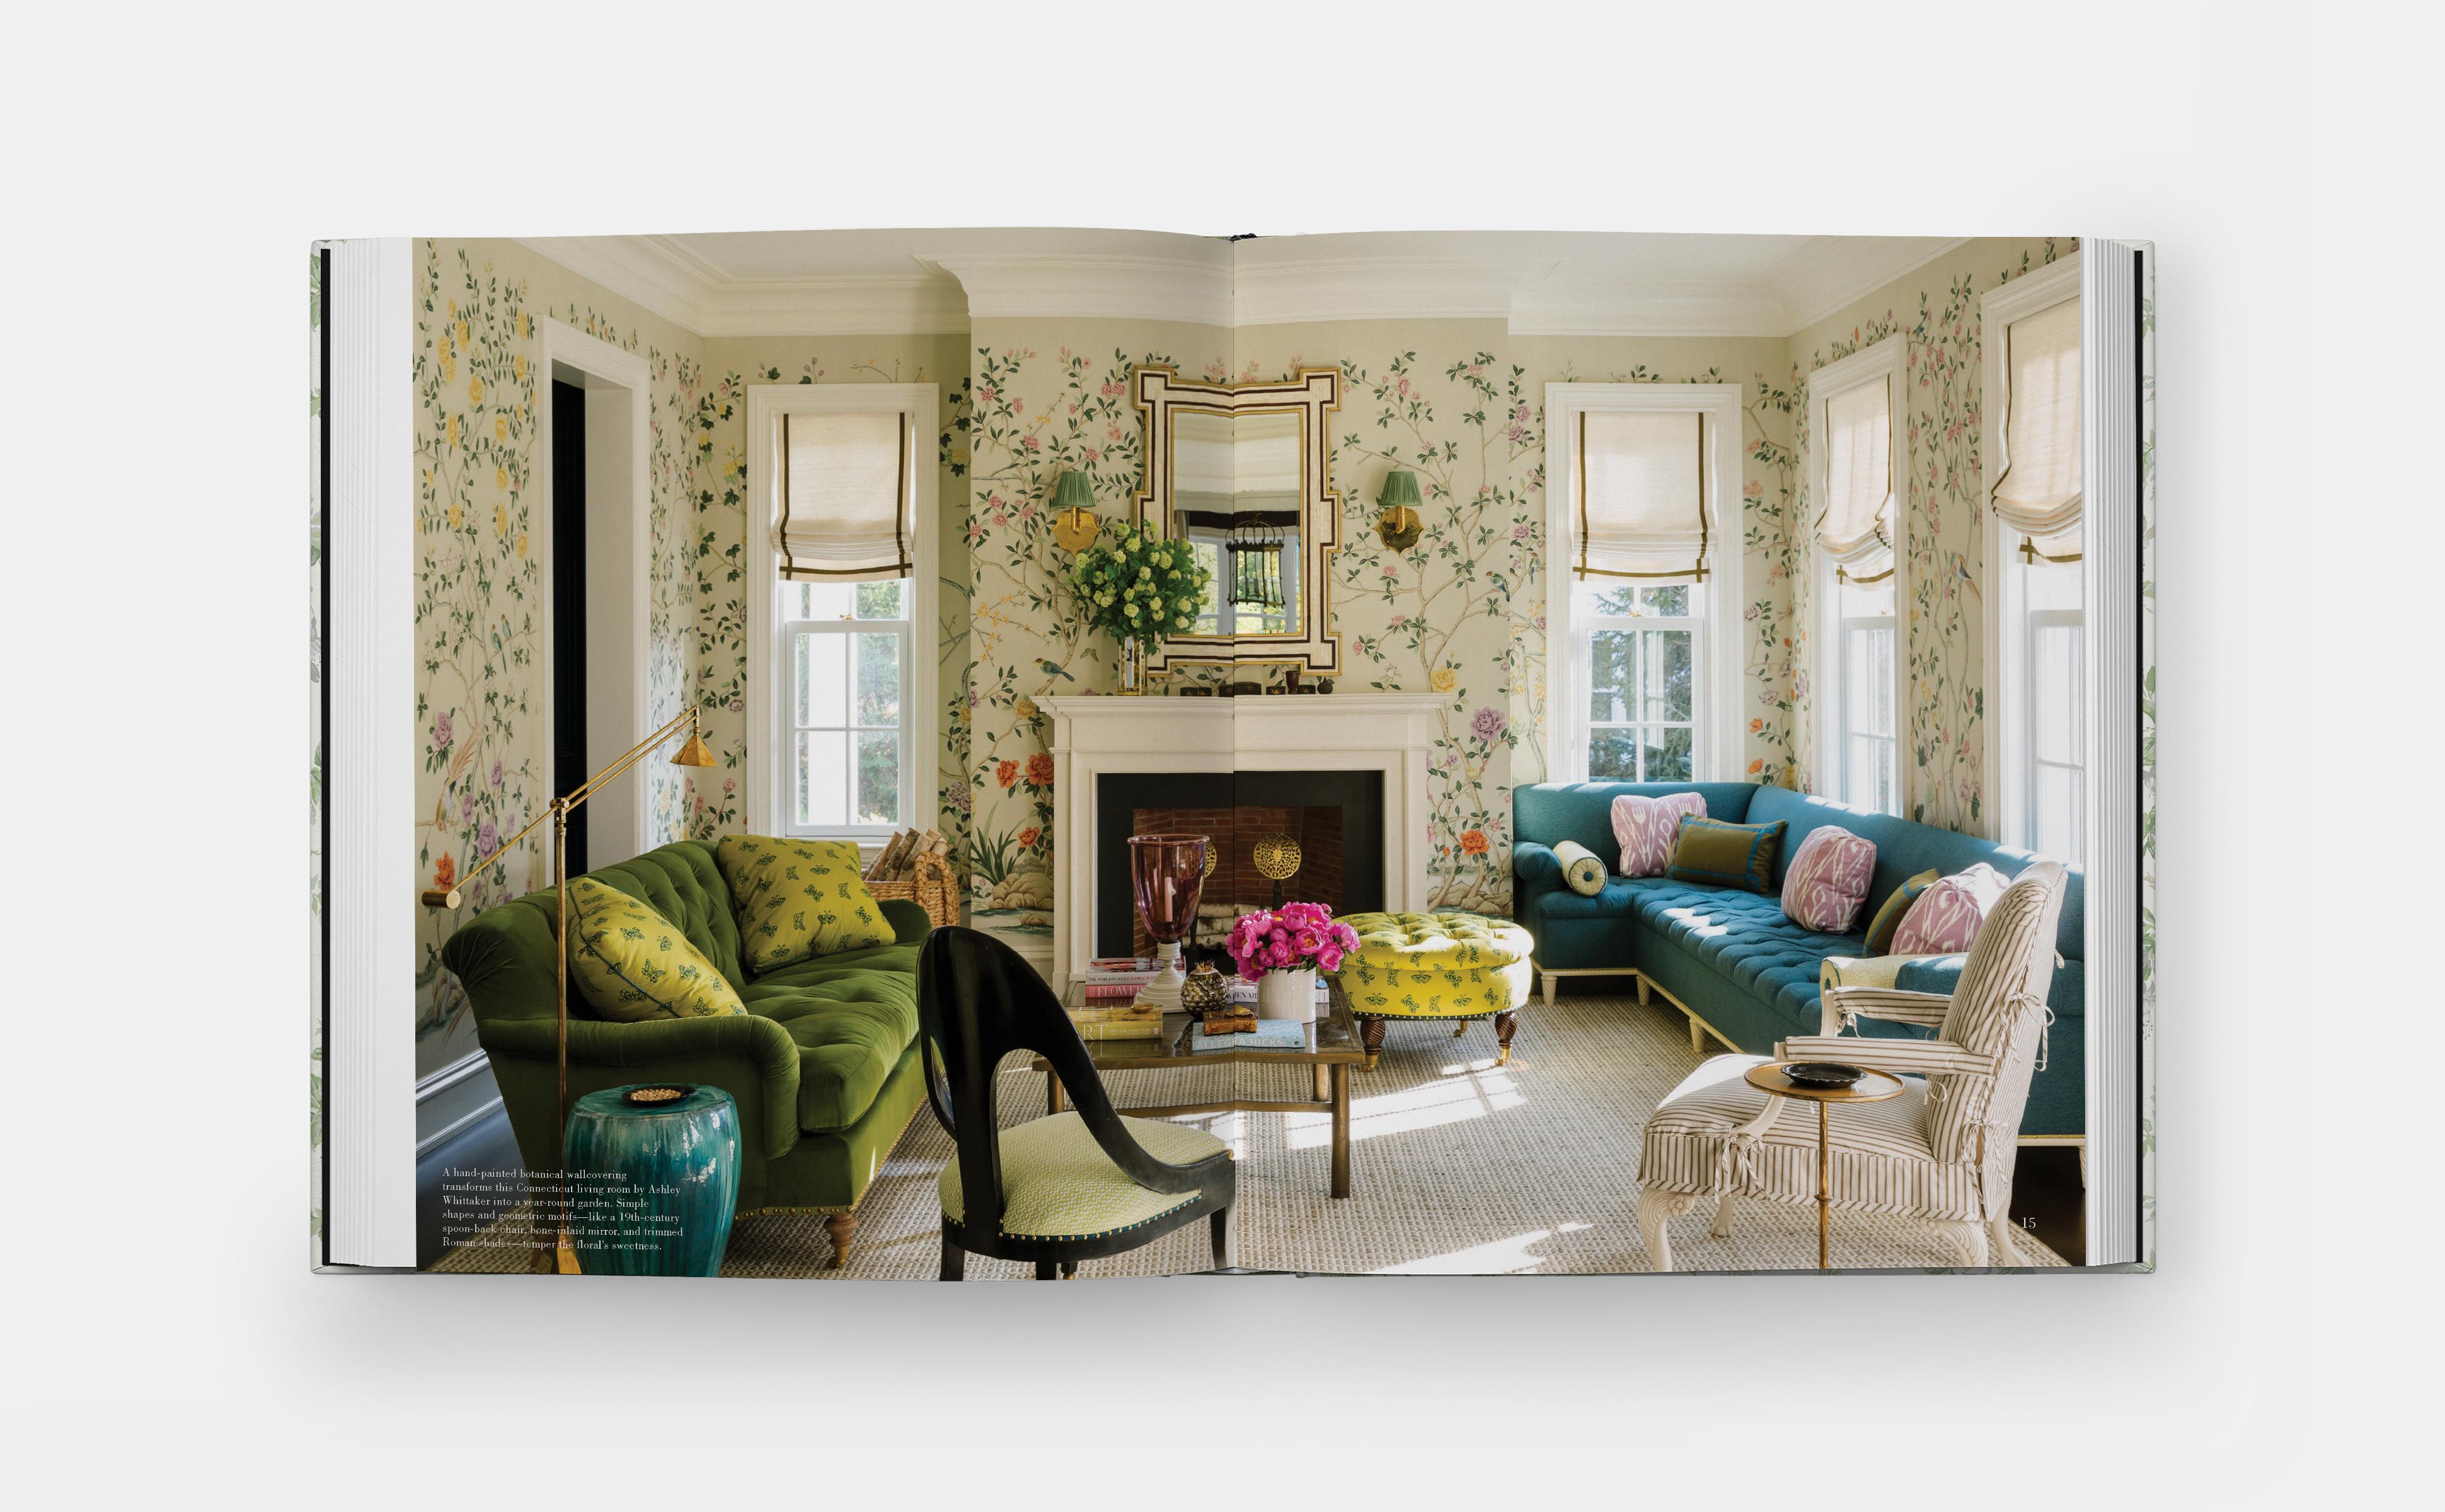 More than 250 rooms by iconic designers – the definitive illustrated handbook on the timeless style of grand millennial-chic
Chintz, ruffles, wicker, and skirts: old-school decorating details are making a comeback in a fresh, new way thanks to a